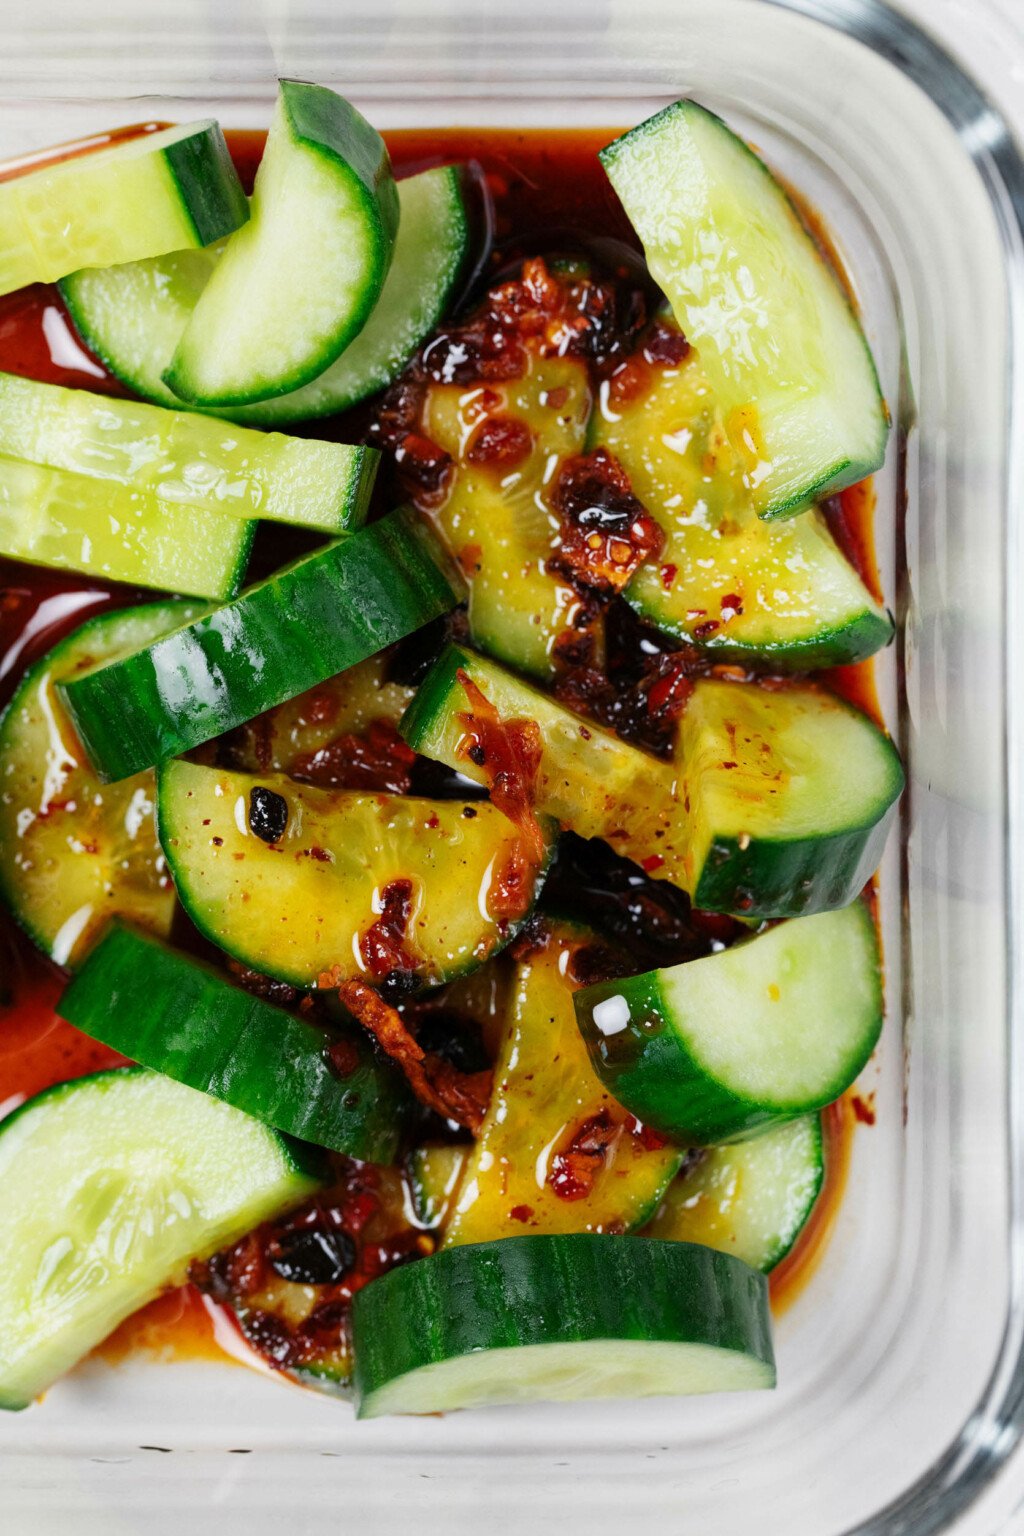 Marinate the cucumbers for a couple hours before assembling your bowls or lunch boxes.